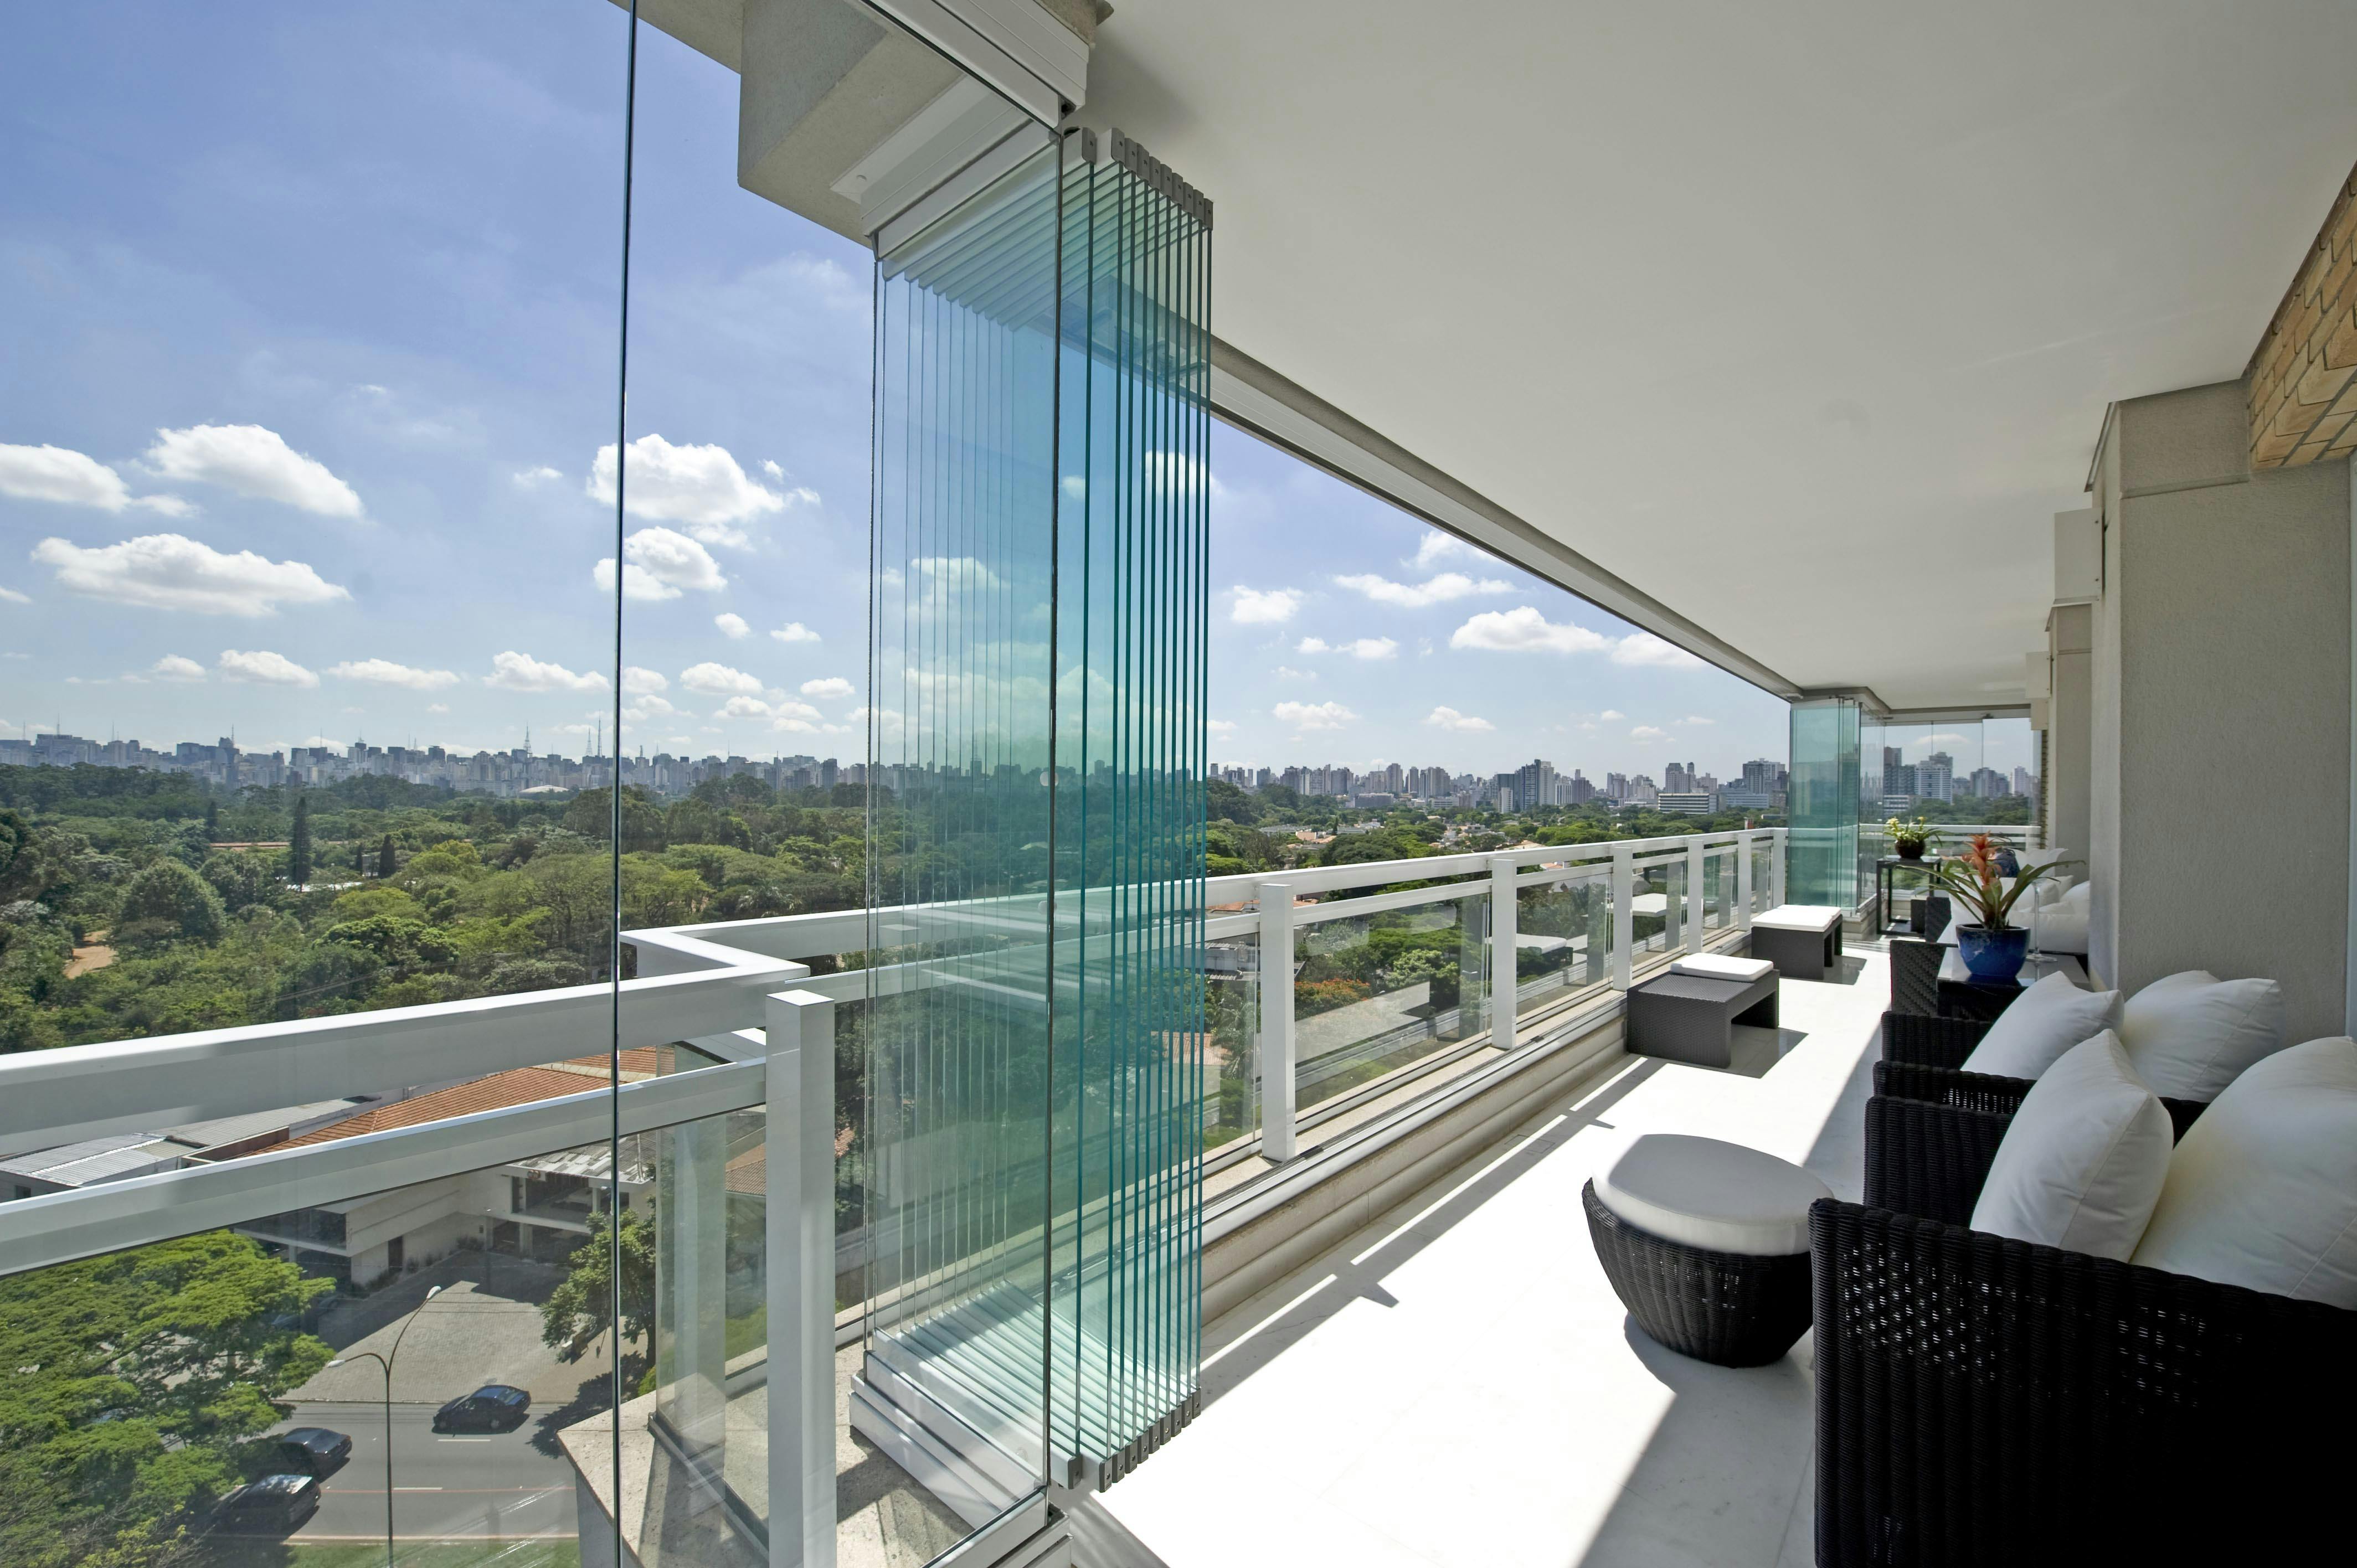 Balcony enclosed with an all glass operable system.